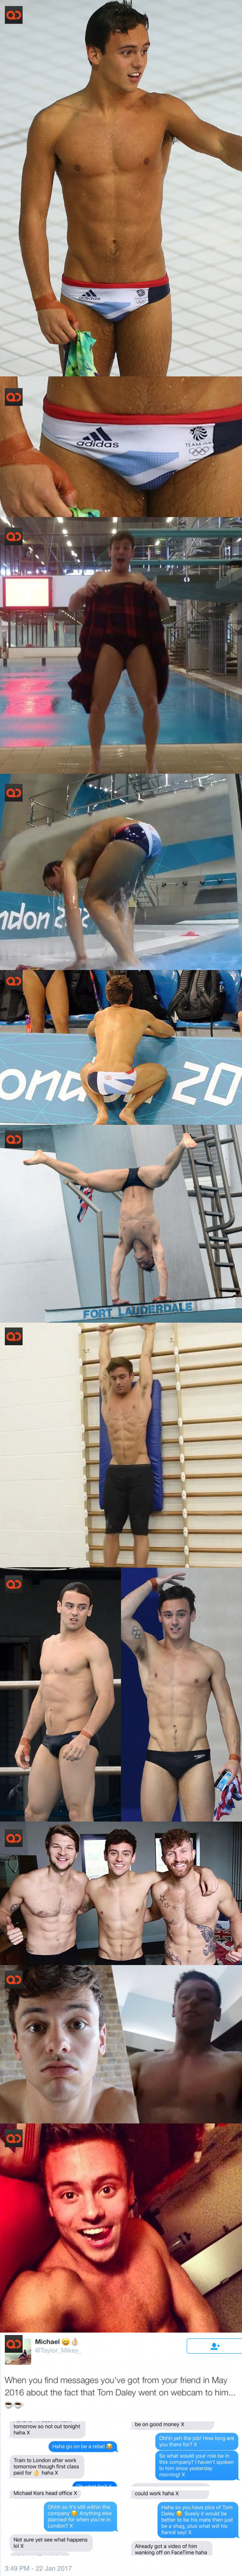 Is Tom Daley Trying To Upstage Chris Mears With His Own Allegedly “Leaked” Video Or It's All A Publicity Stunt?